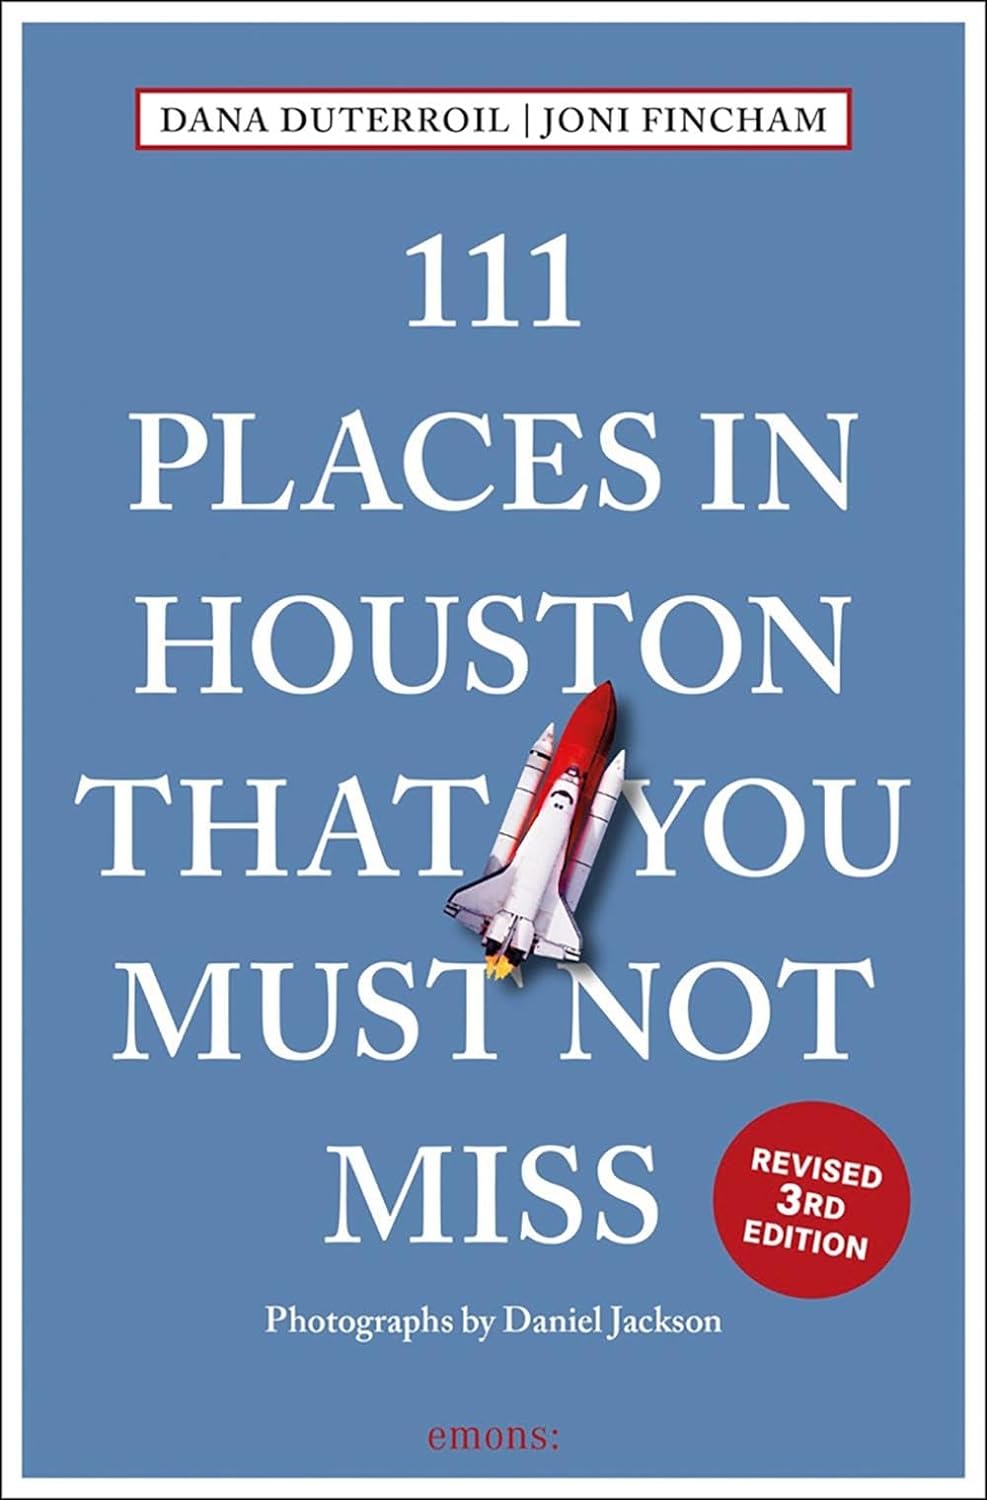 Online bestellen: Reisgids 111 places in Places in Houston That You Must Not Miss | Emons